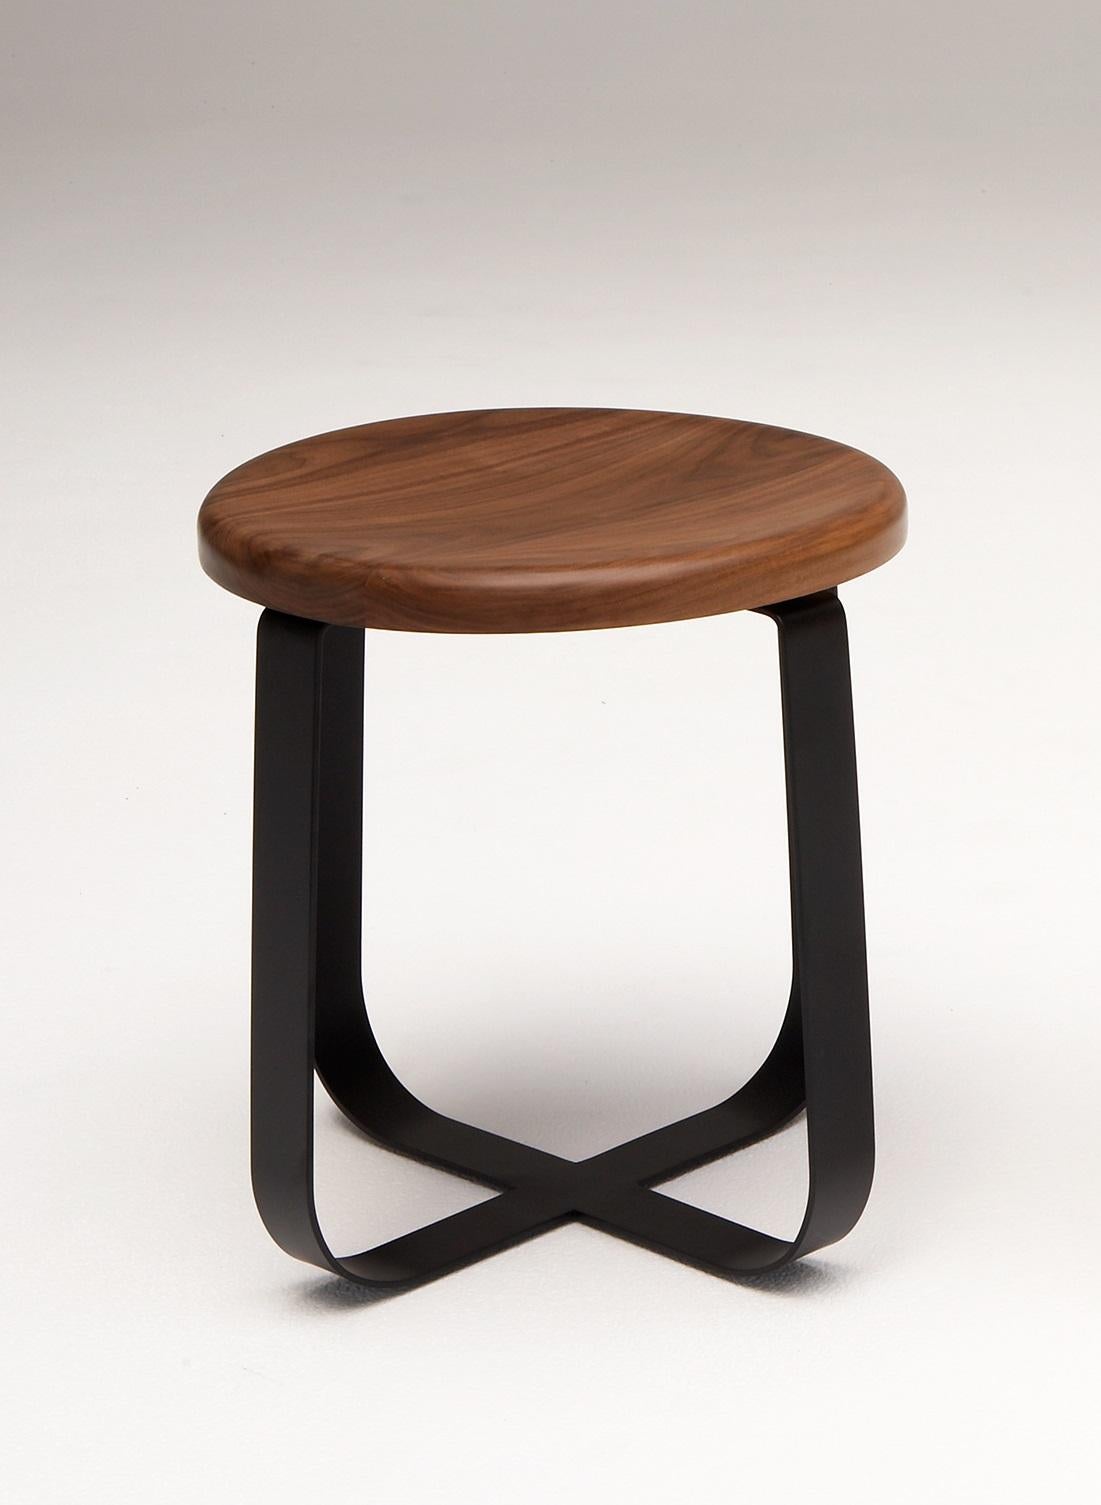 Primi Low Stool by Phase Design
Dimensions: Ø 48.3 x H 44.5 cm. 
Materials: Powder-coated steel and walnut.

Solid steel flat bar available in a flat black or white powder coat finish with CNC cut walnut, white ash, or upholstered top. Powder coat